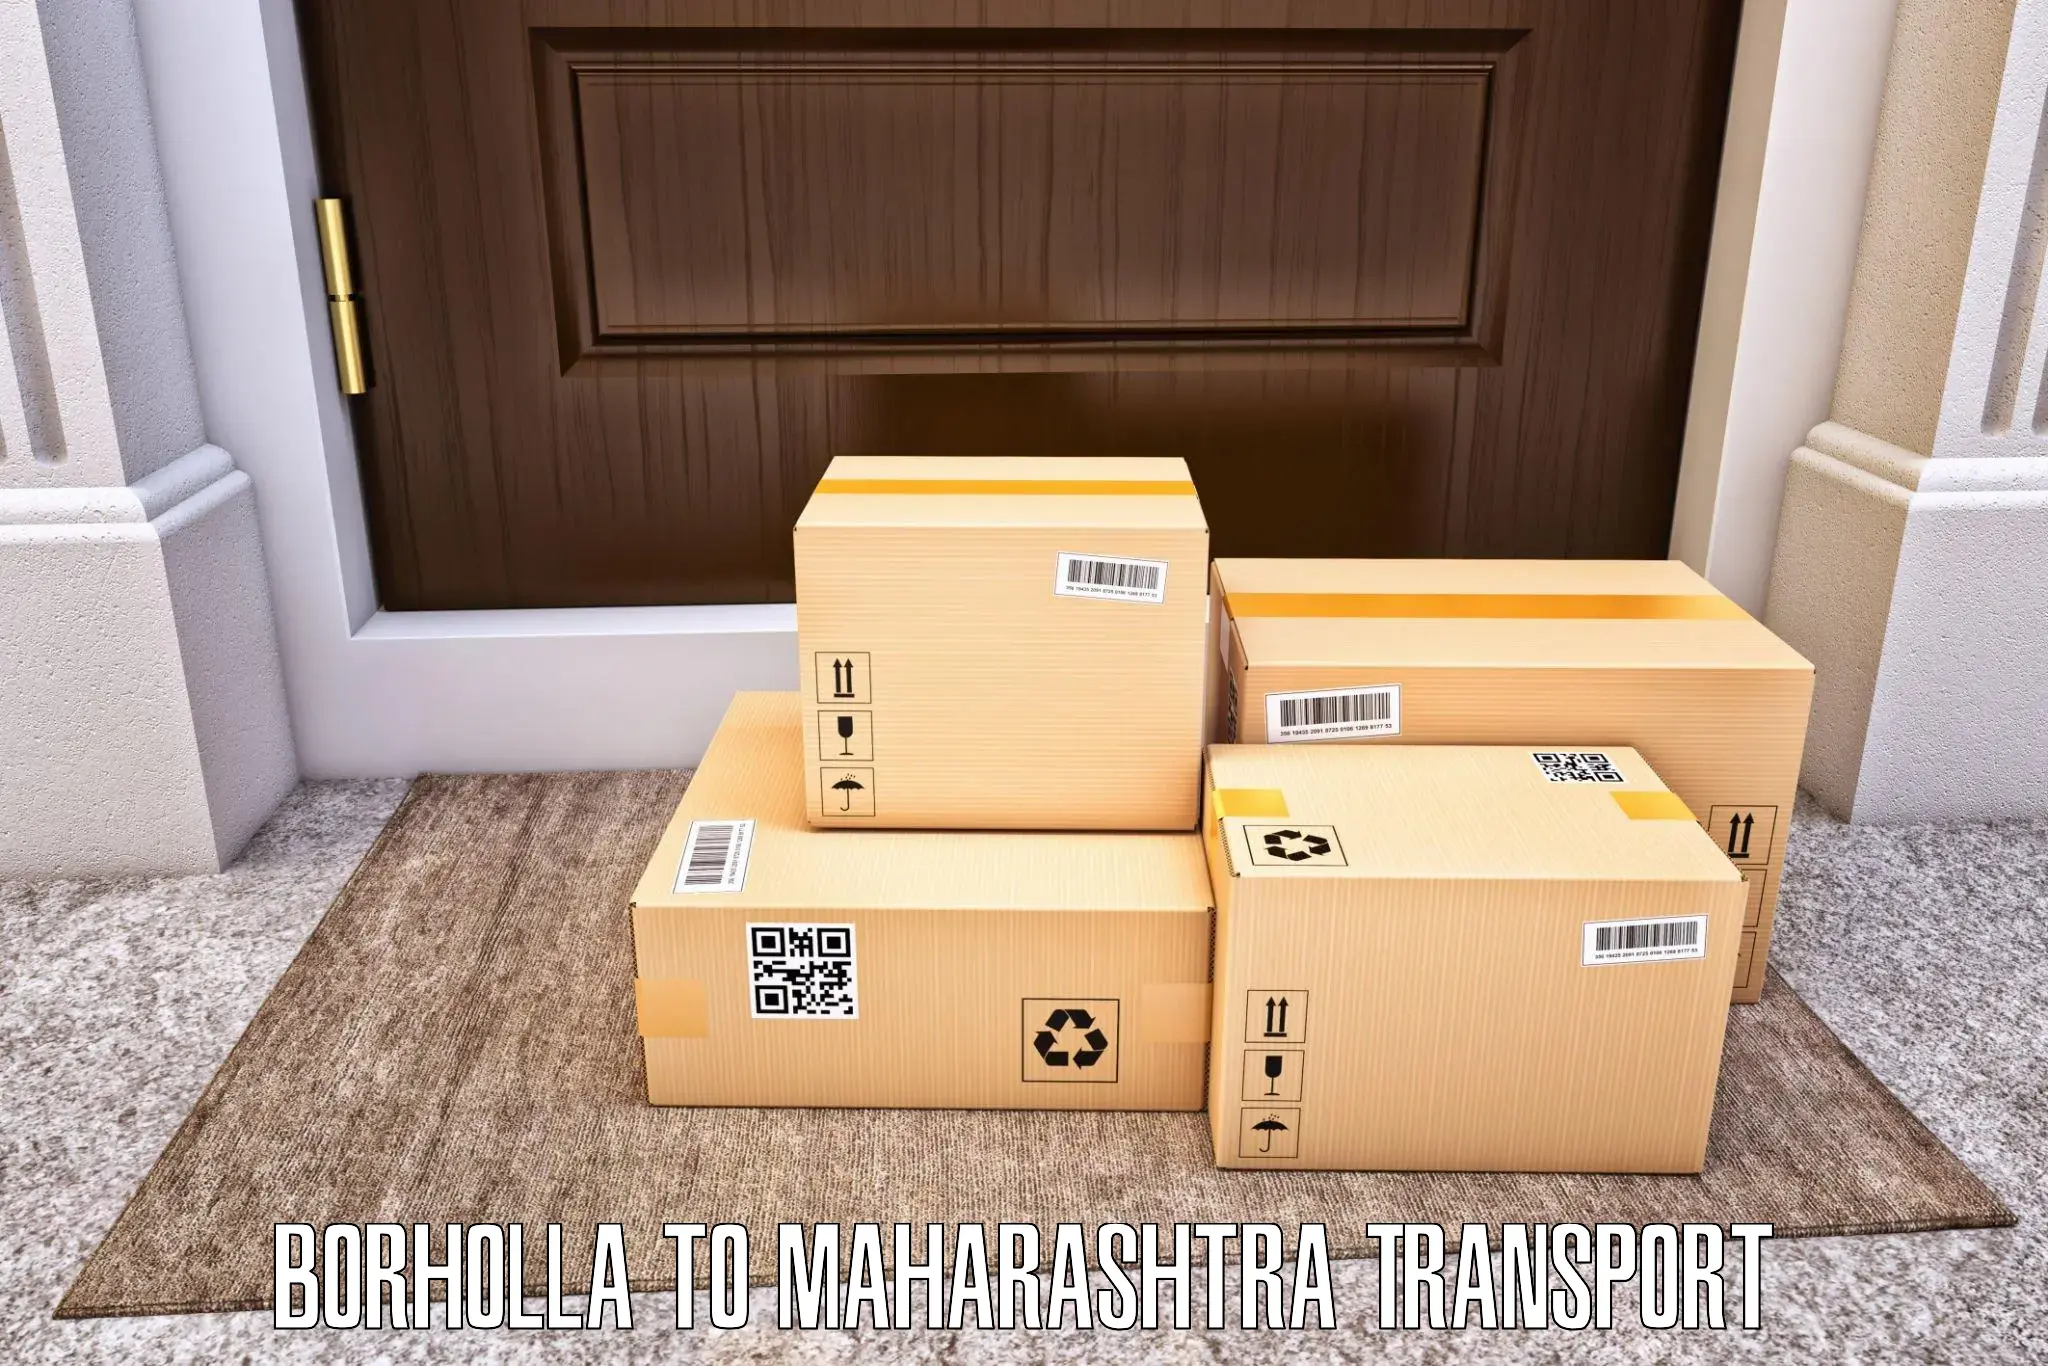 Goods transport services in Borholla to Masrul